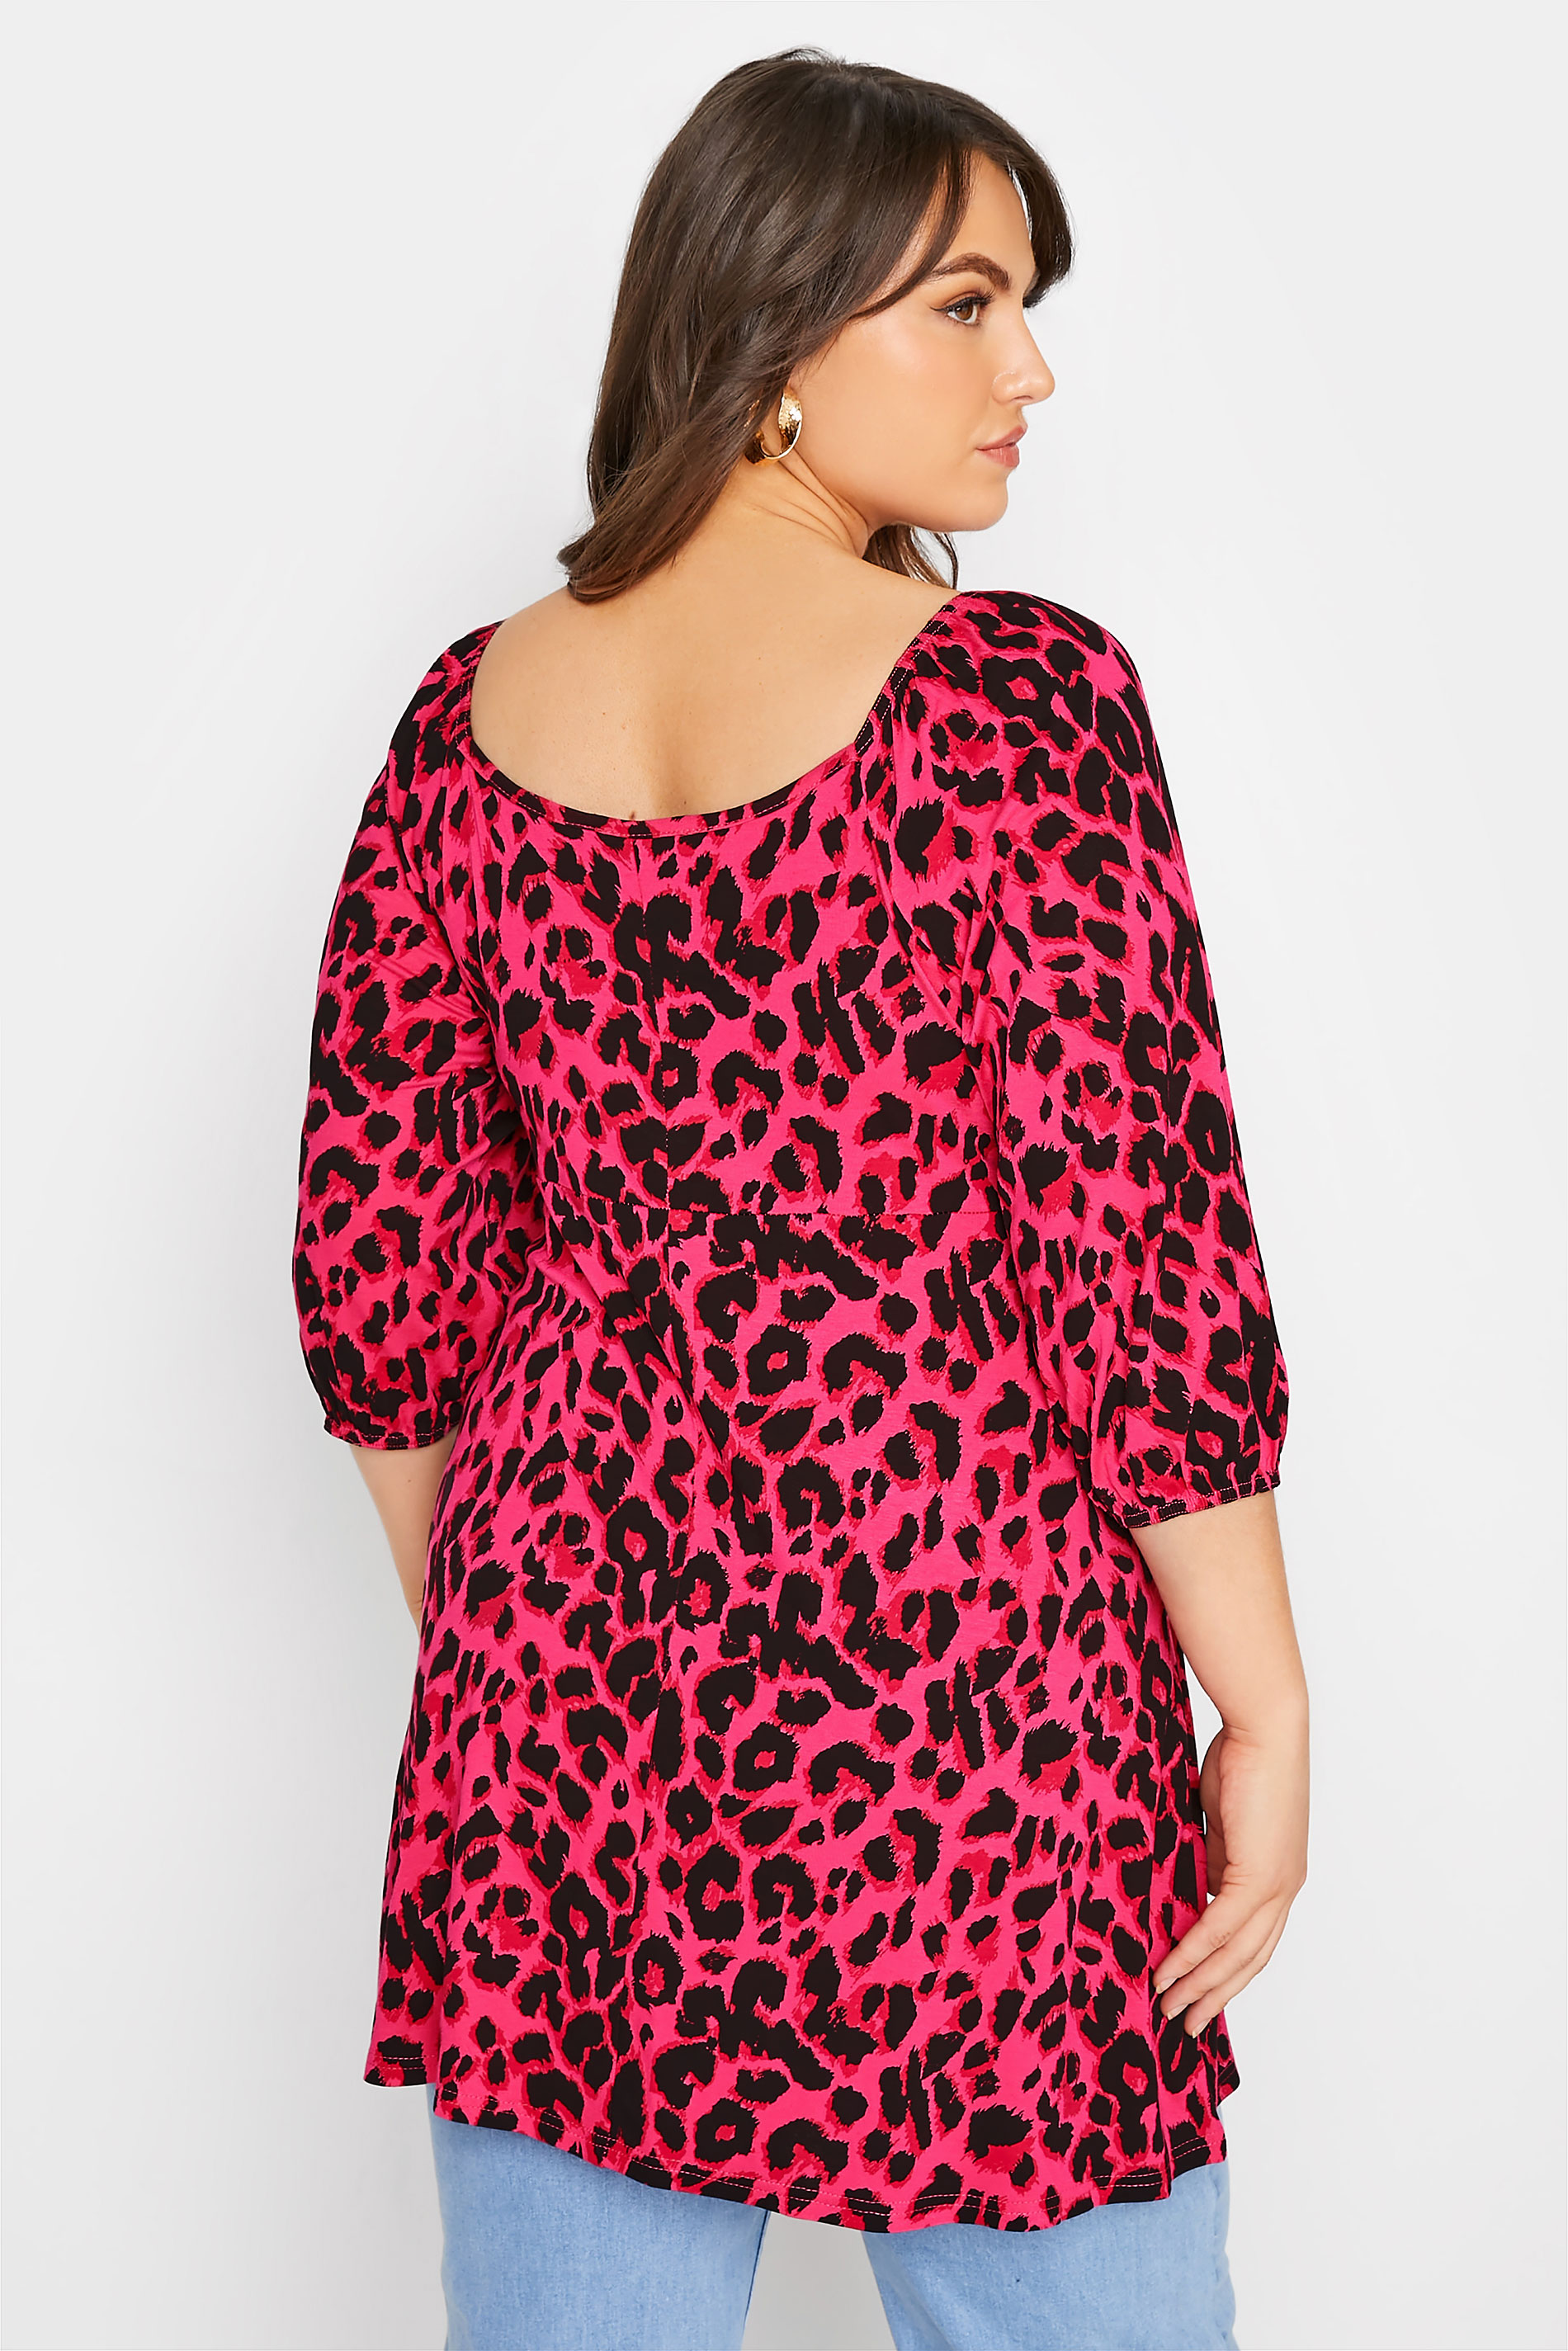 LIMITED COLLECTION Plus Size Hot Pink Leopard Print Wrap Top | Yours Clothing 3